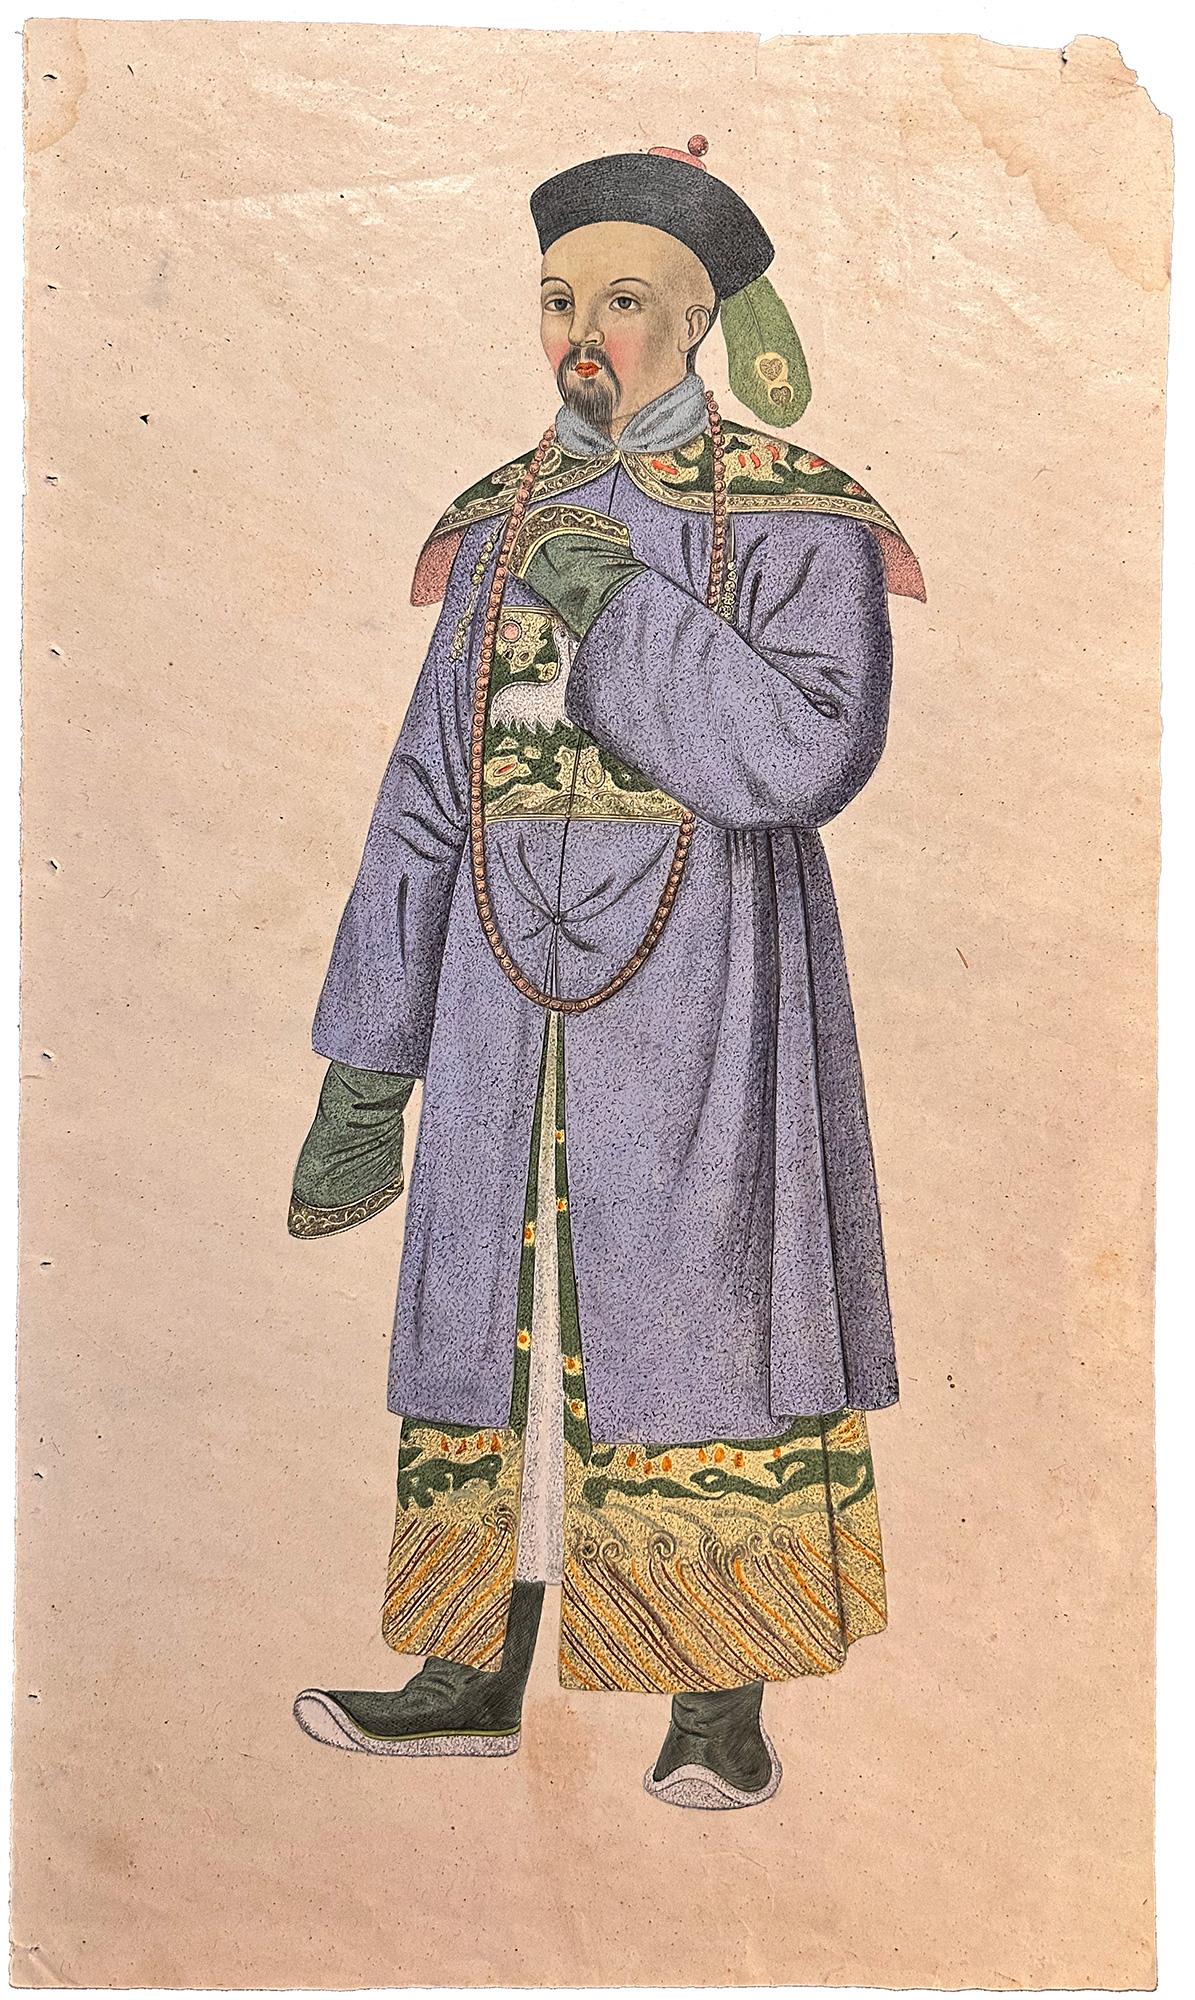 Pu Qùa Figurative Print - A Chinese Nobleman, from The Costume of China, by G.H. Mason, engr. John Dadley